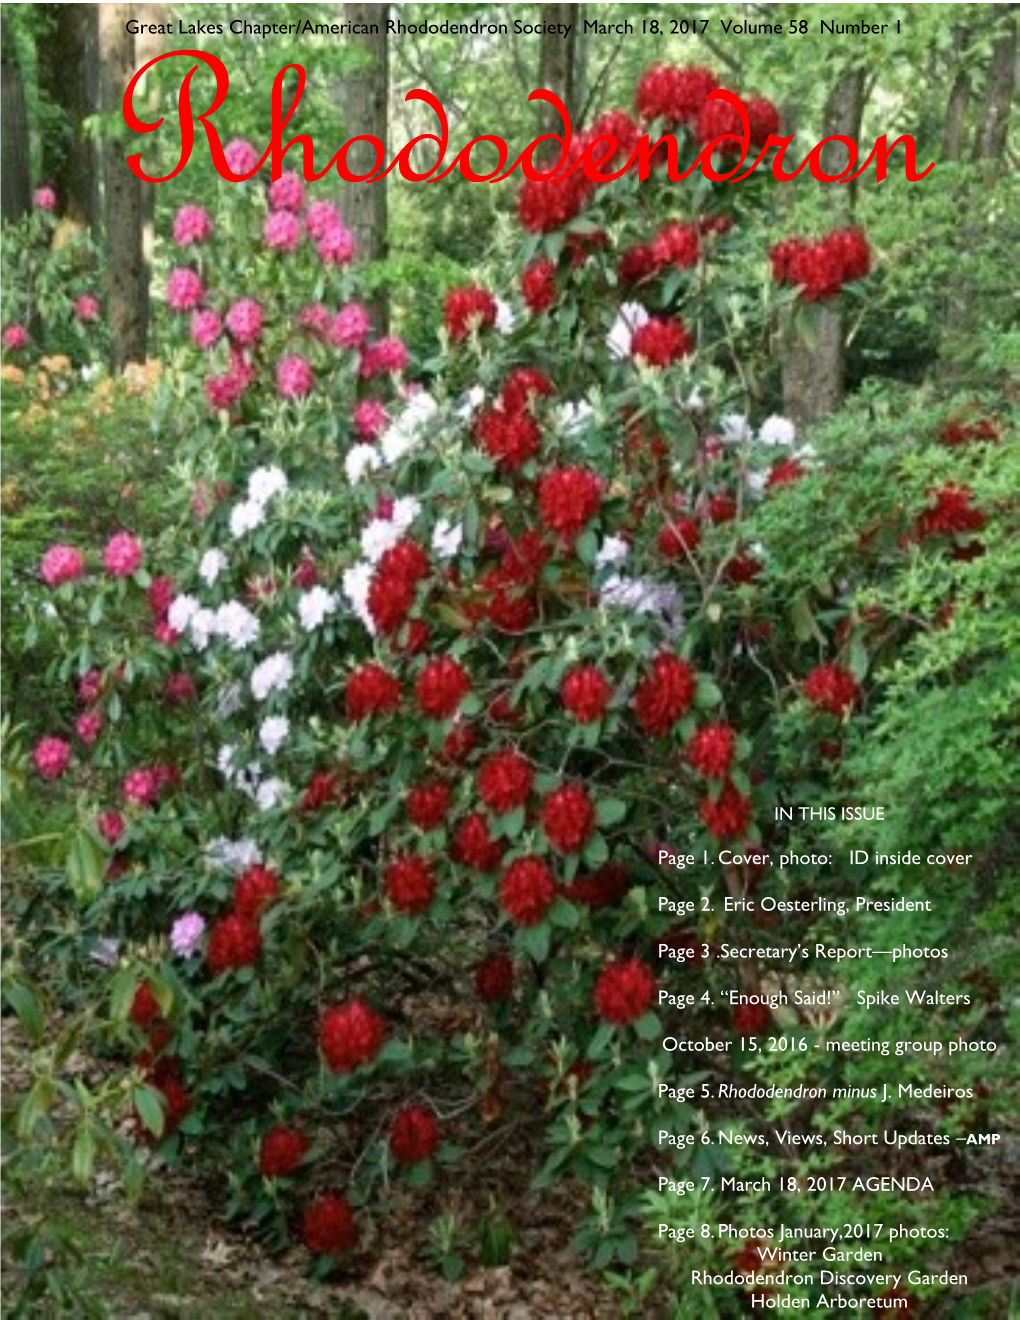 Rhododendron Volume 58 Number 1 March 2017